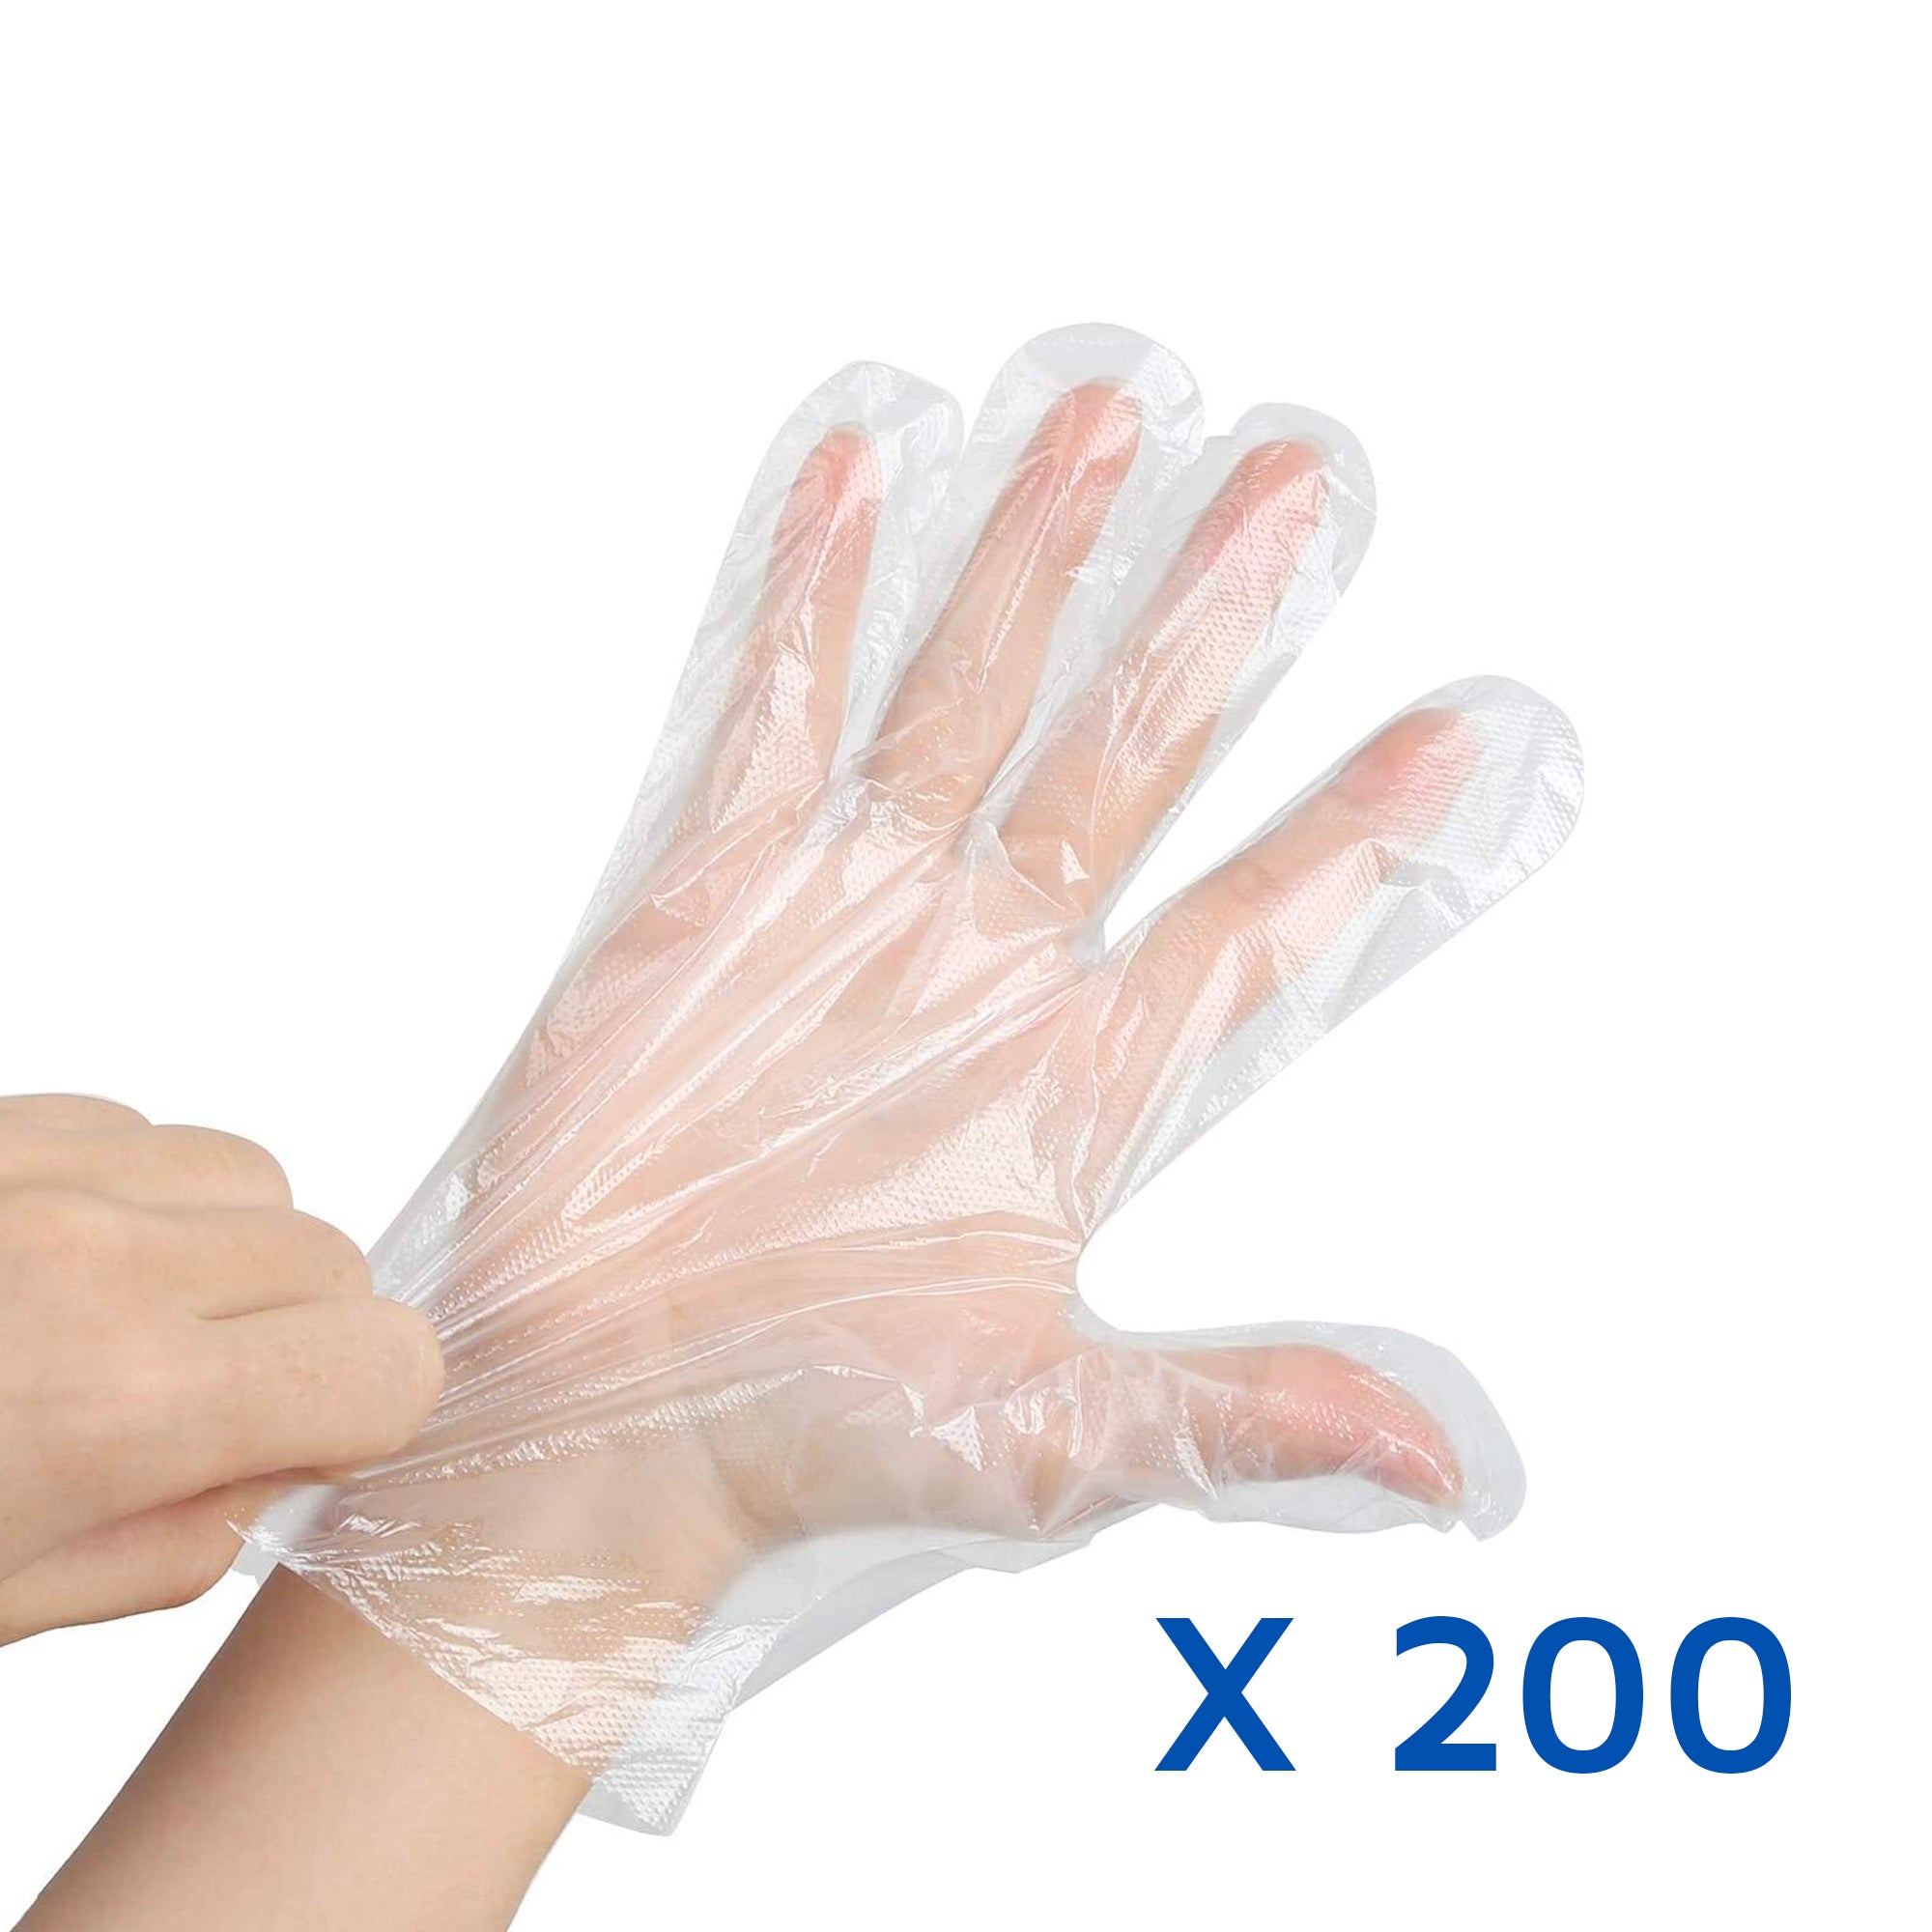 Disposable Plastic Gloves (One Size) (3p per glove)